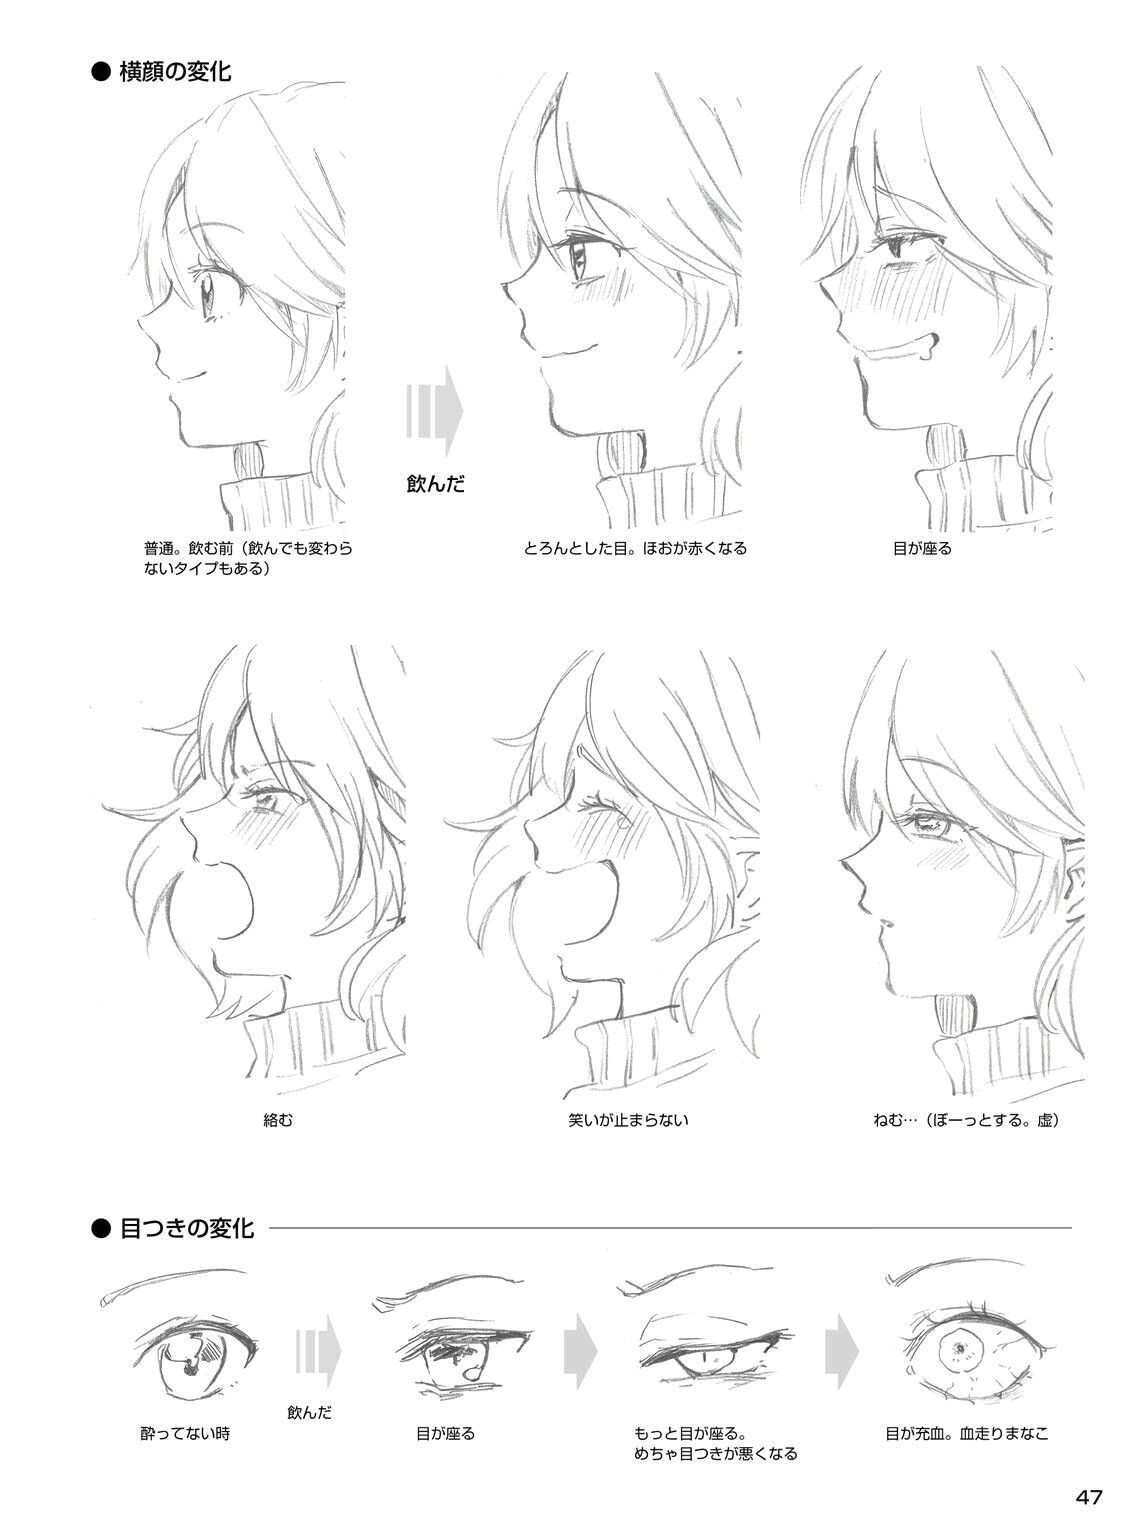 Drawing Anime Side Face Pin by Luis Wtf On Projects to Try Pinterest Drawings Realistic